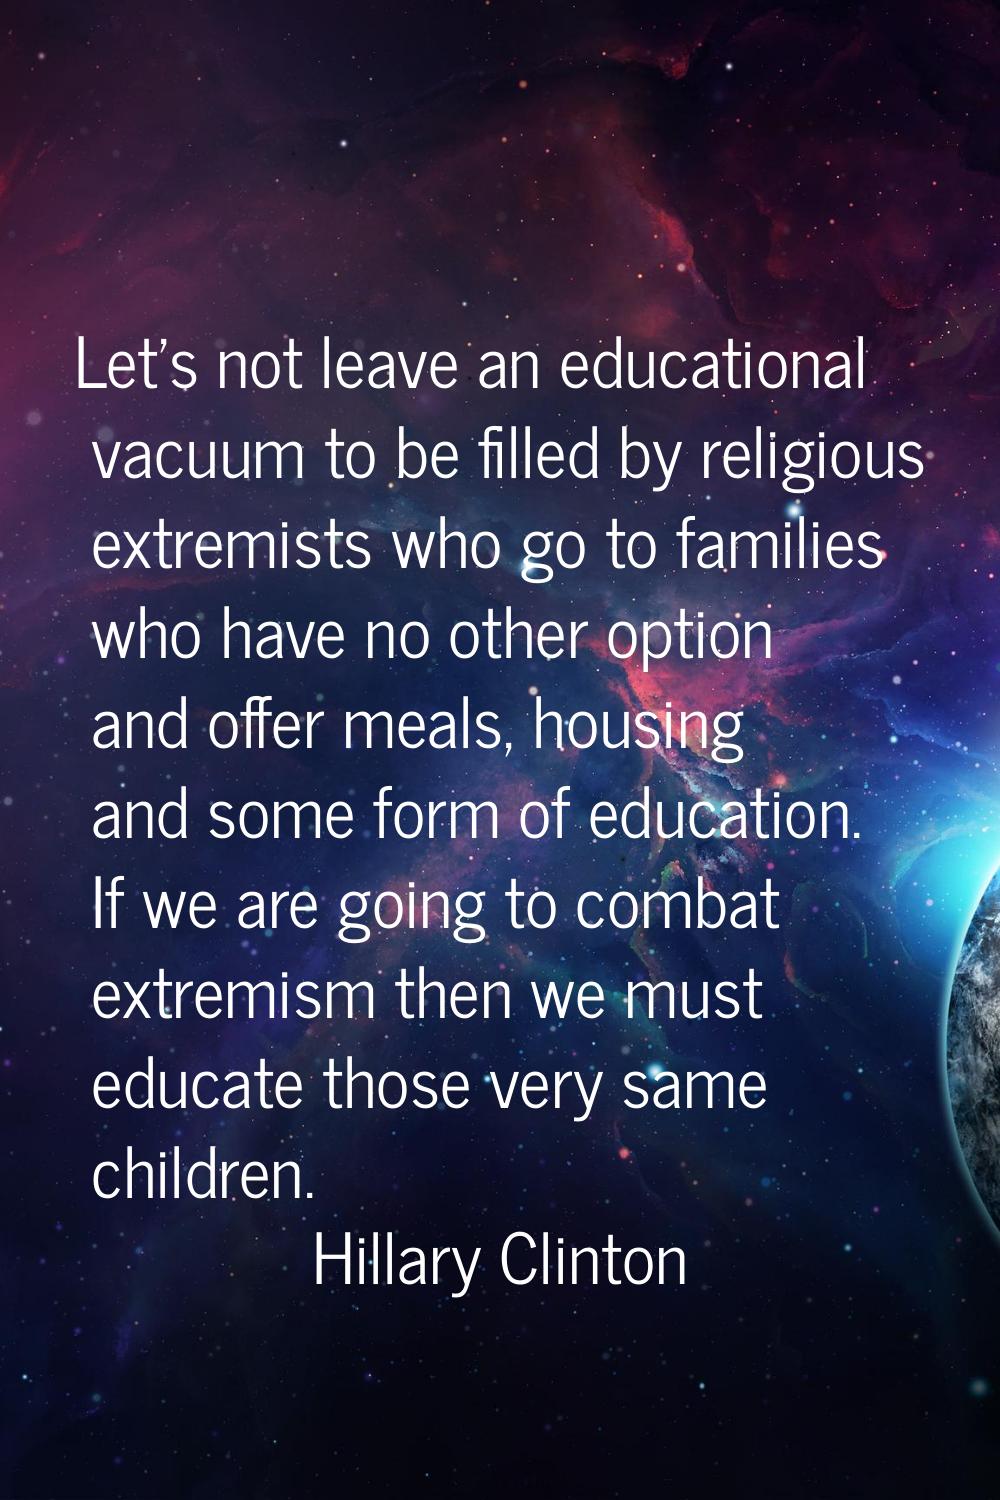 Let's not leave an educational vacuum to be filled by religious extremists who go to families who h